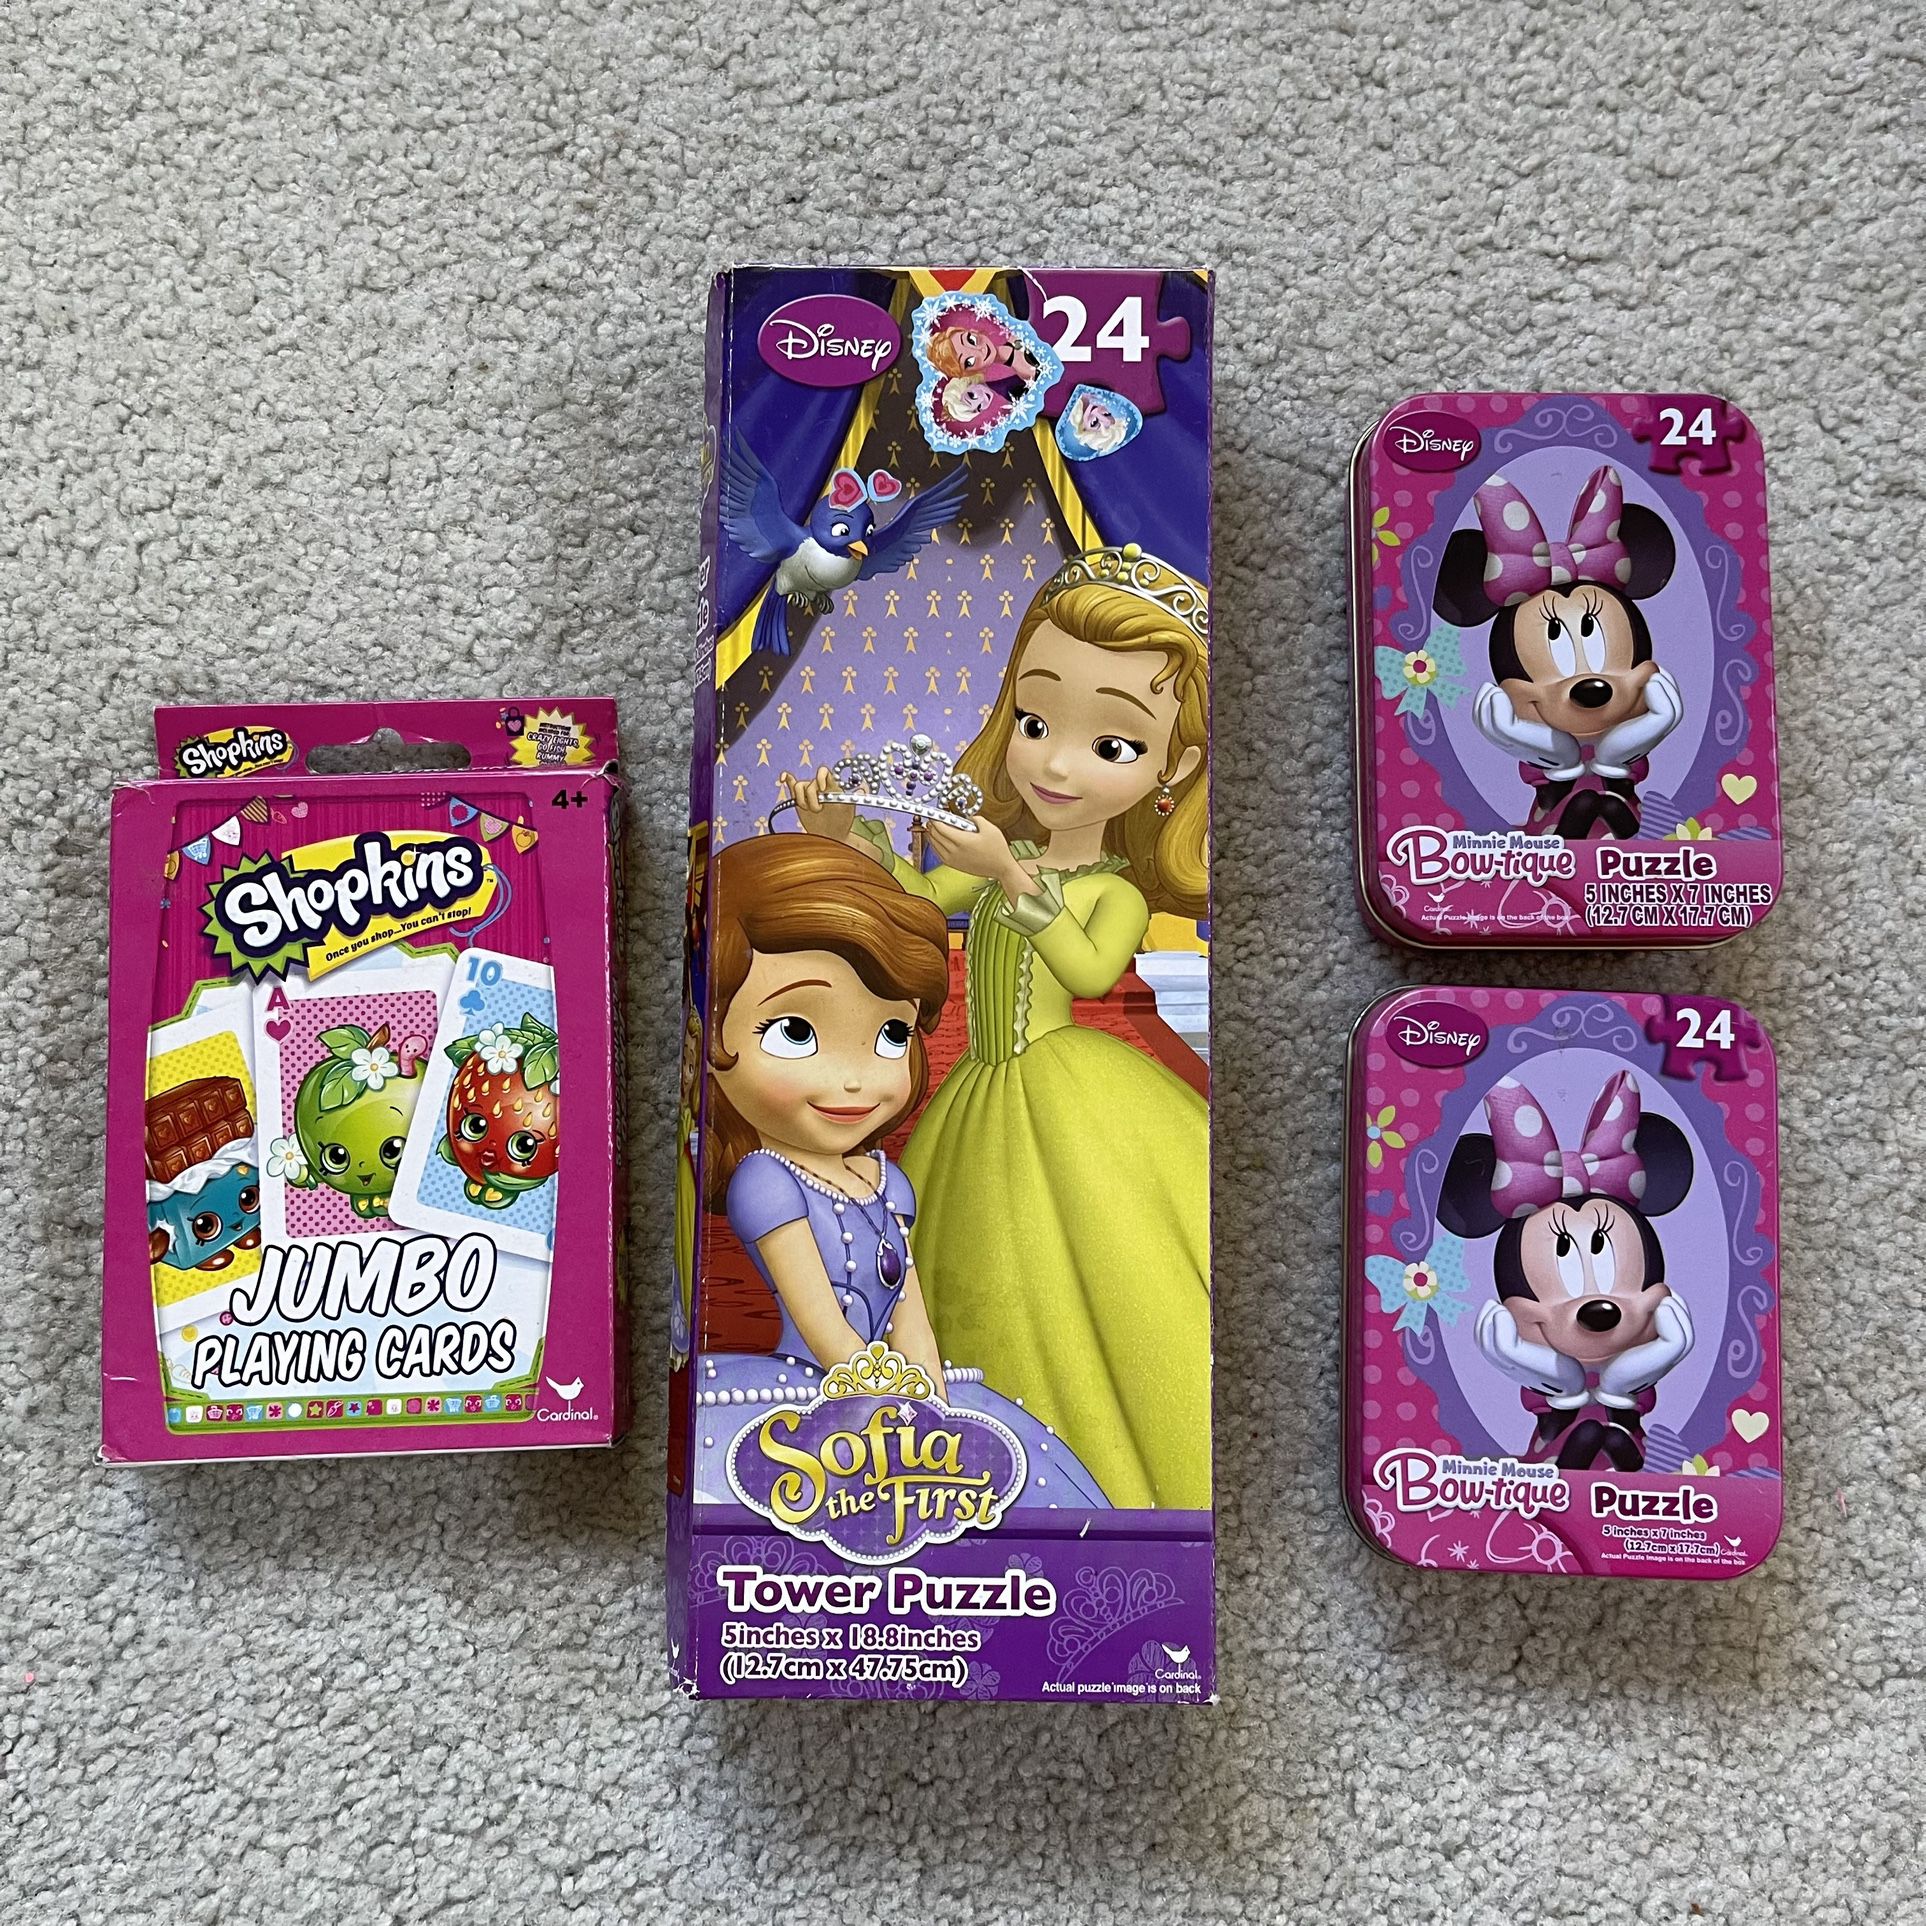 Disney Minnie Mouse & Sophia Puzzles, Shopkins Playing Cards